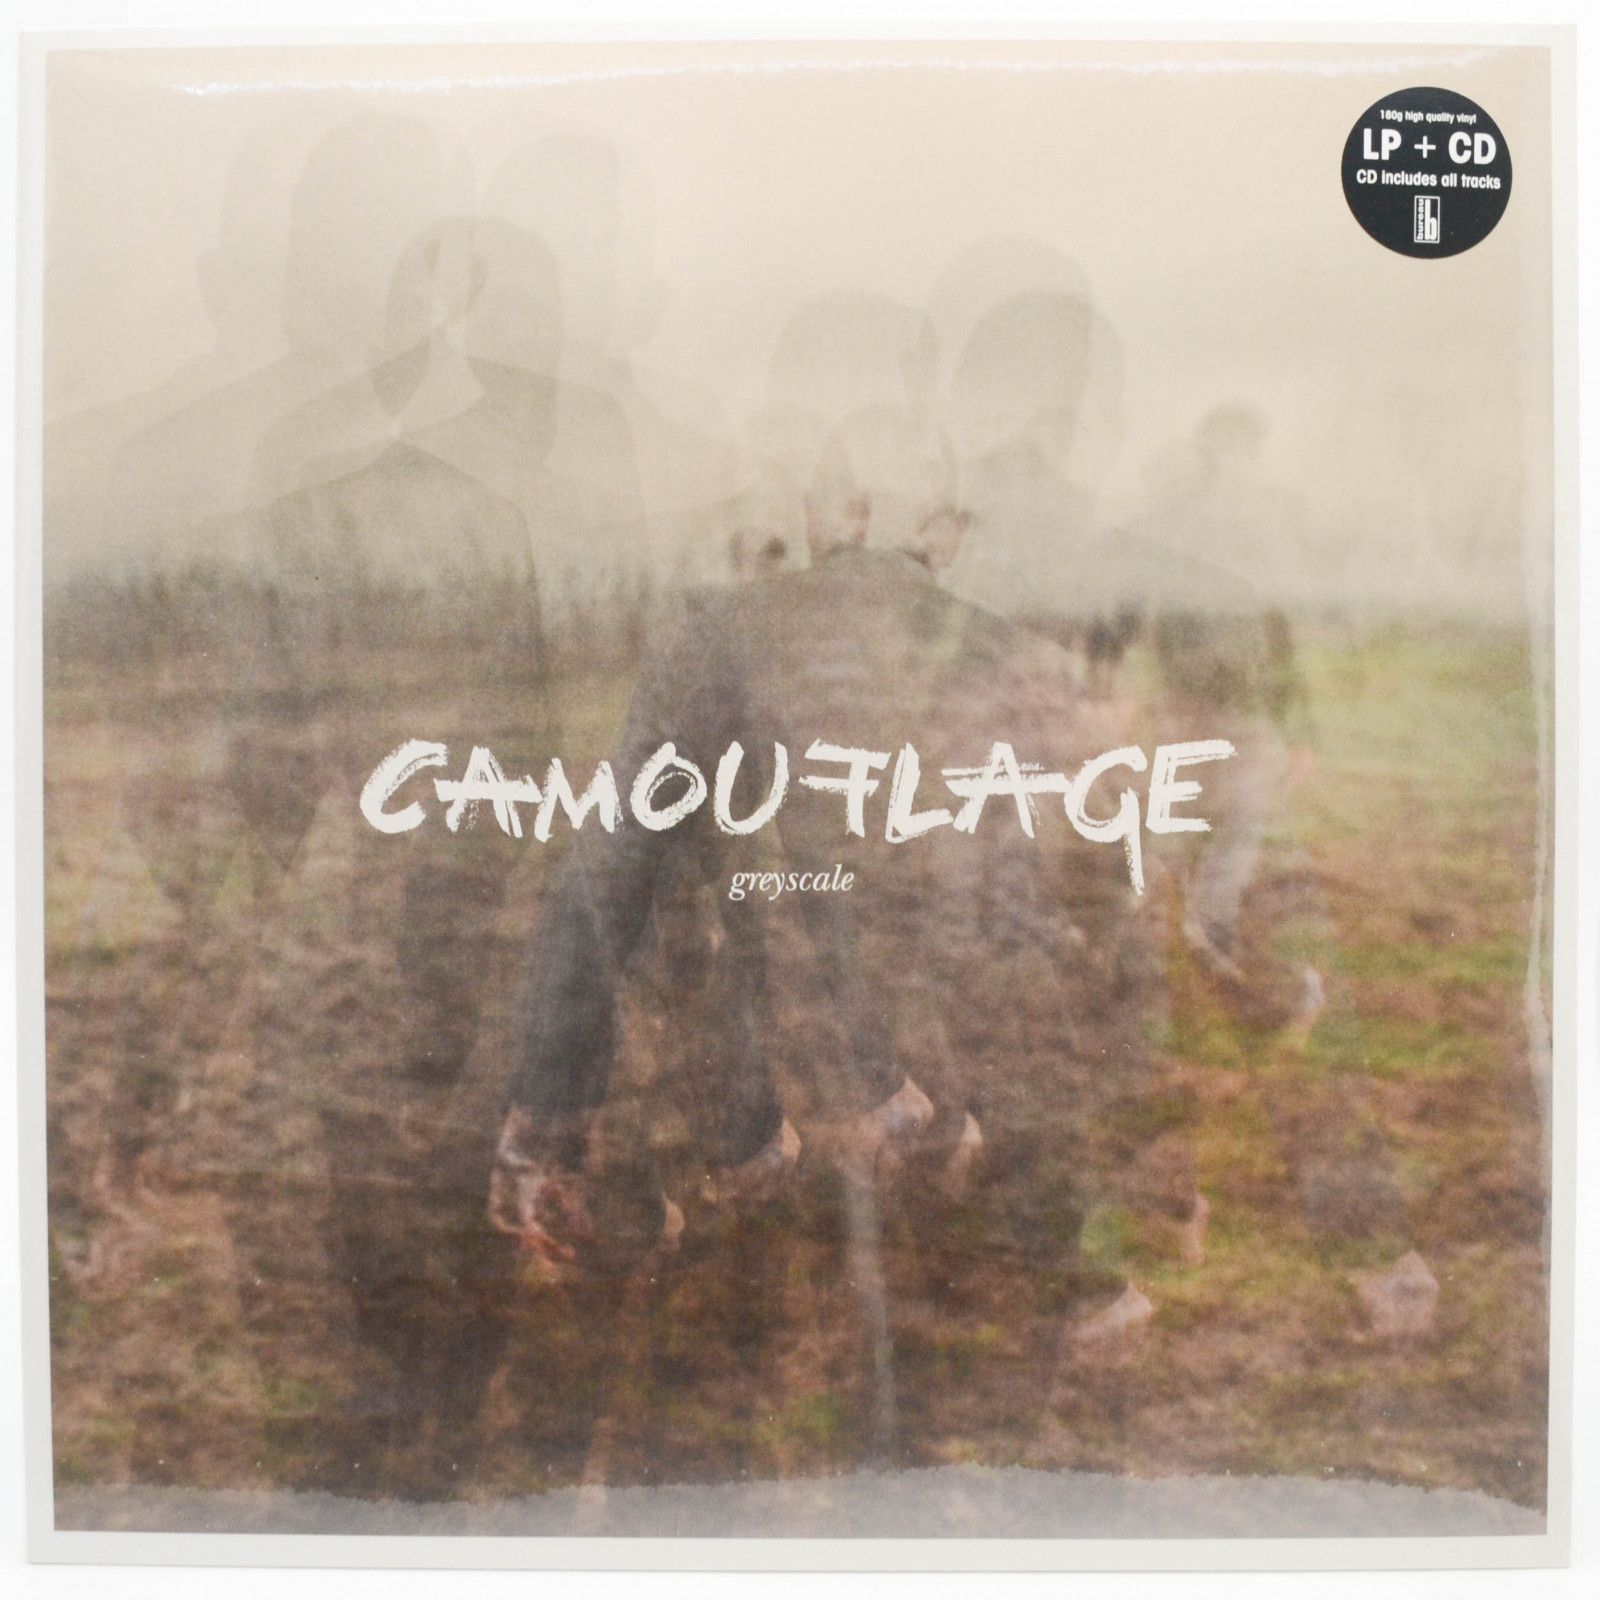 Camouflage — Greyscale (LP+CD), 2015